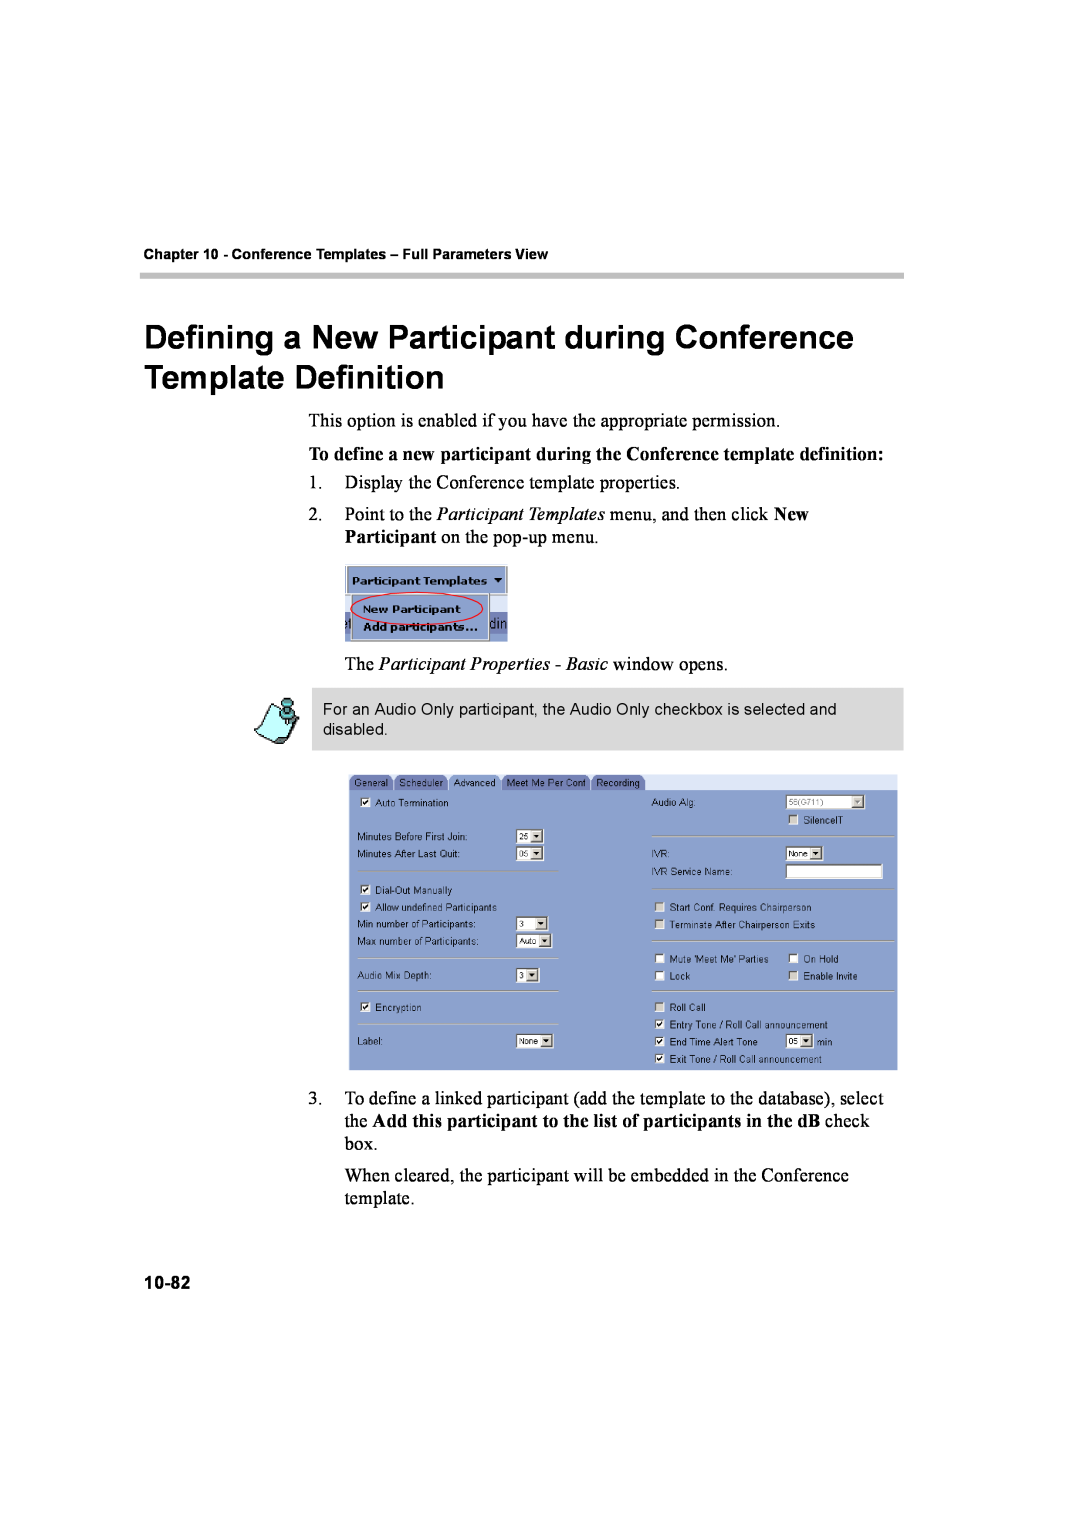 Polycom 8 manual The Participant Properties - Basic window opens, Display the Conference template properties 